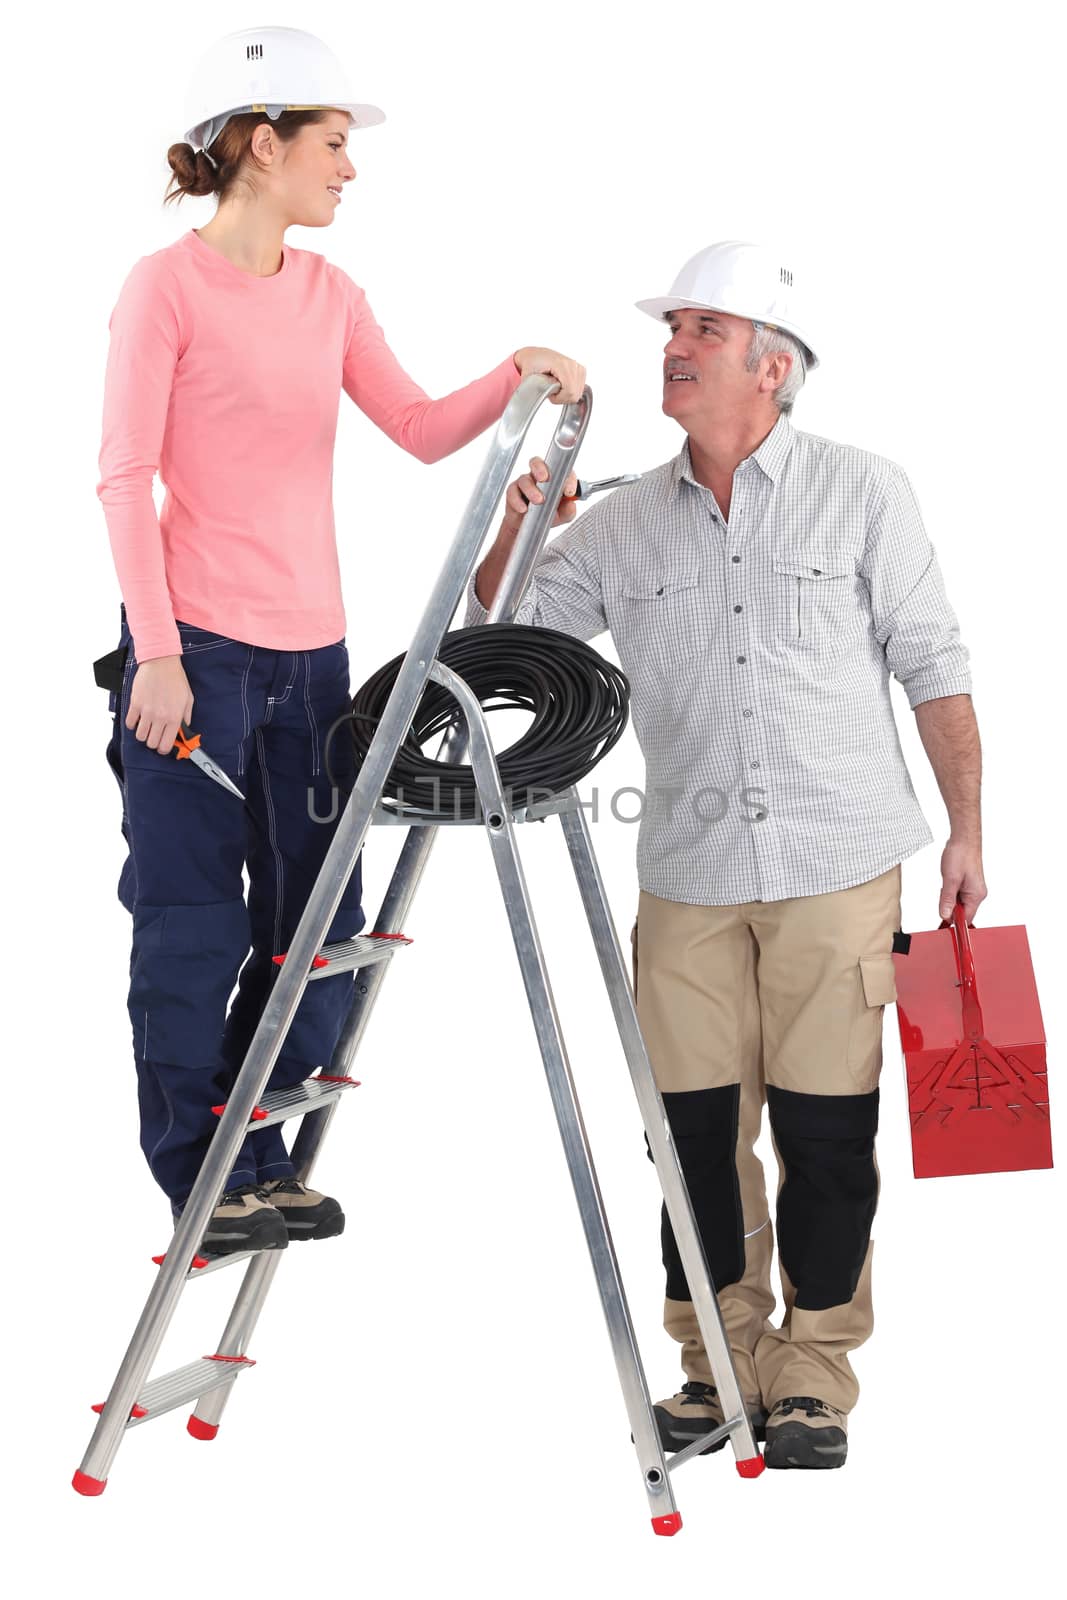 Electrician working with new female recruit by phovoir